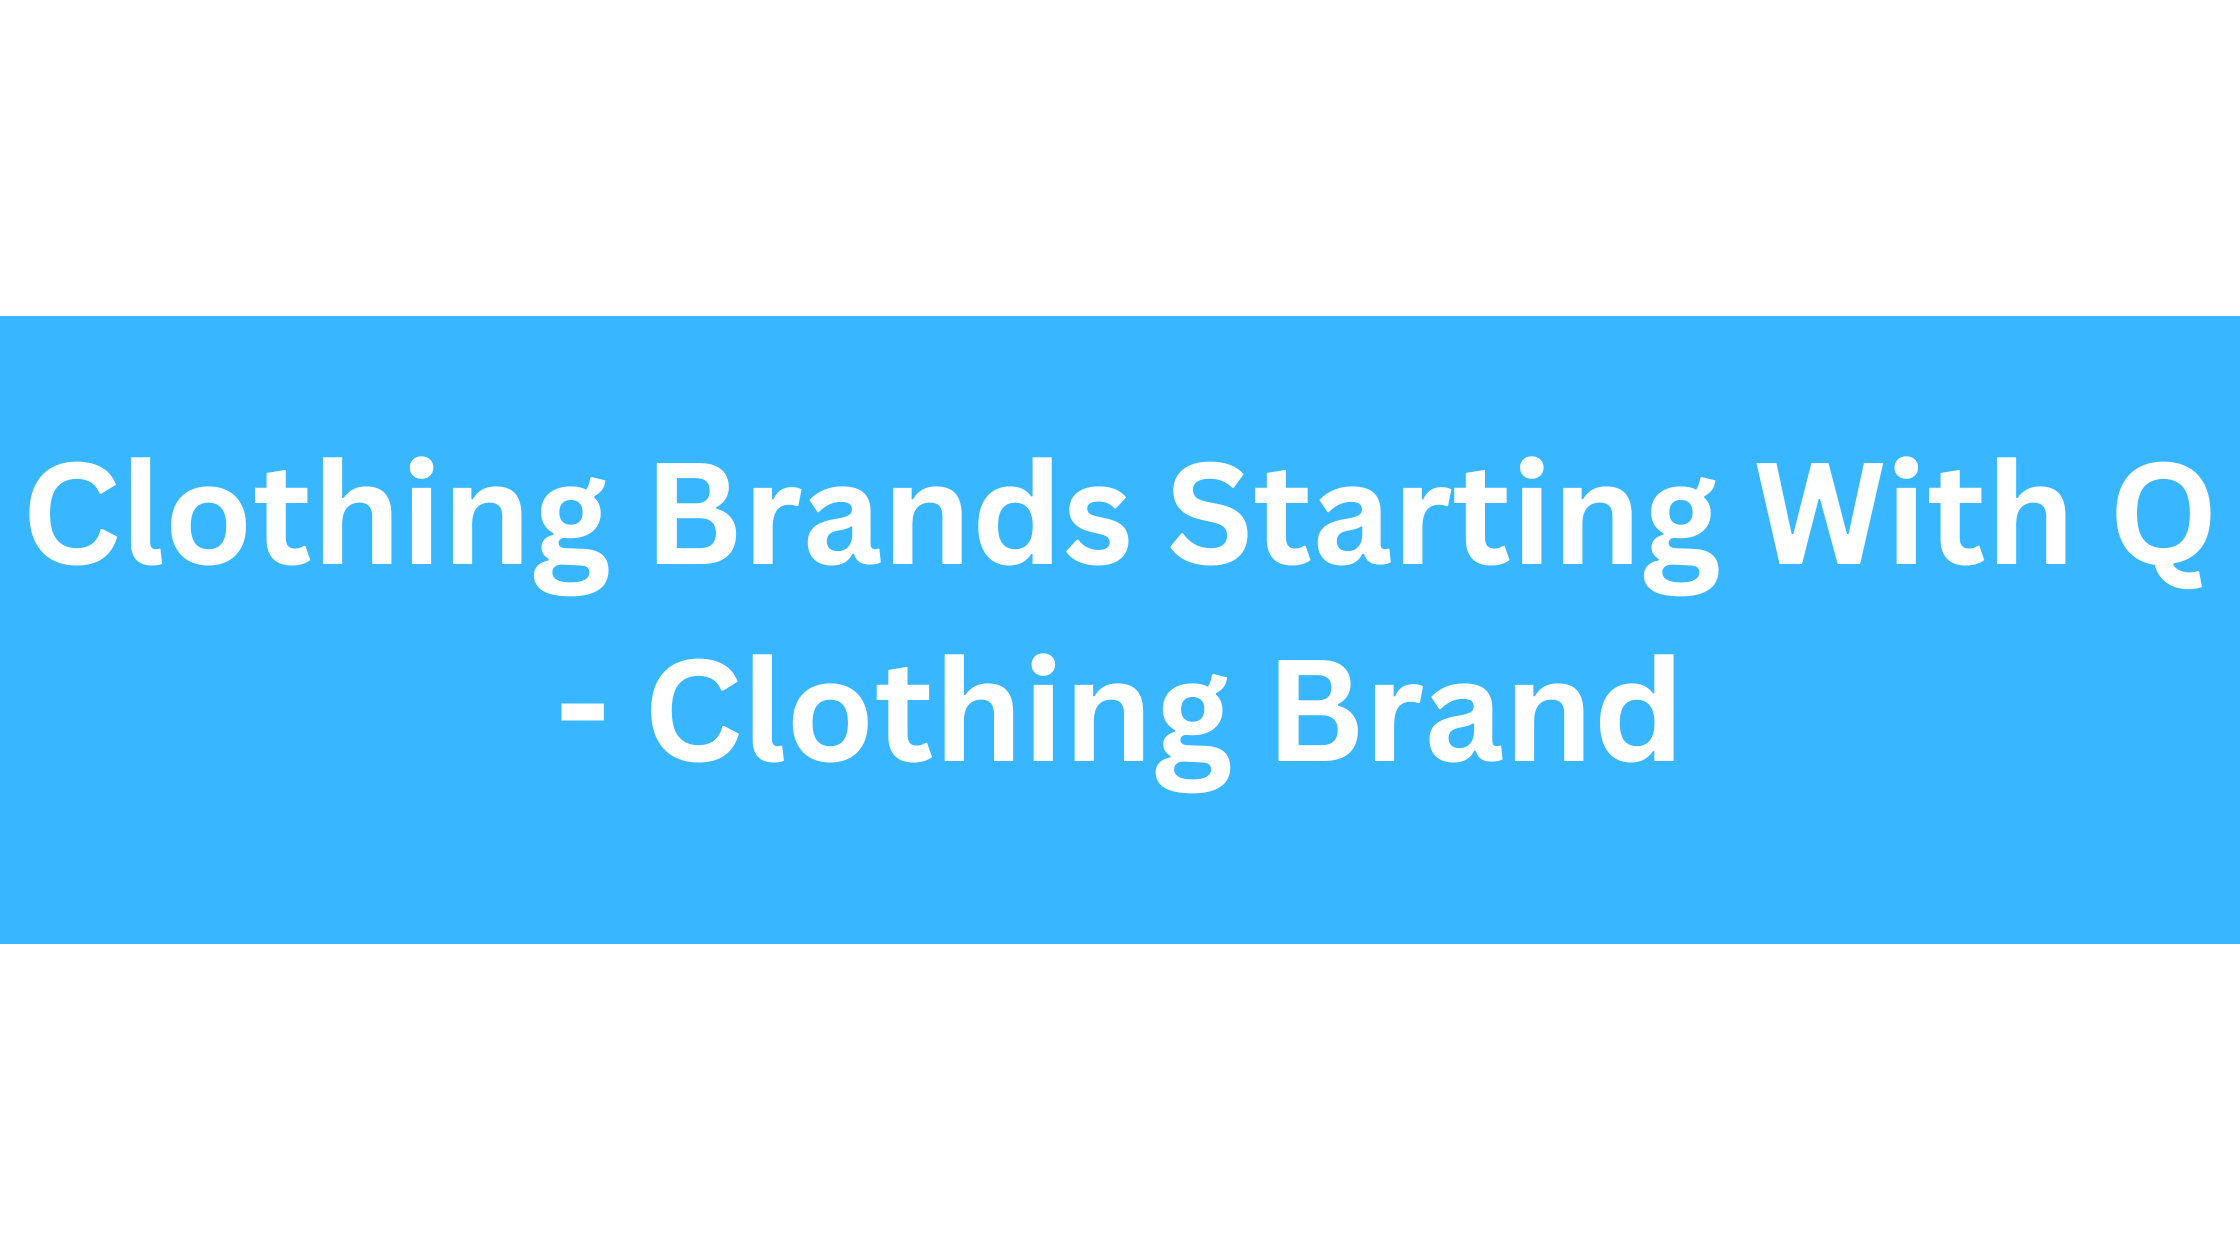 Clothing Brands Starting With Q